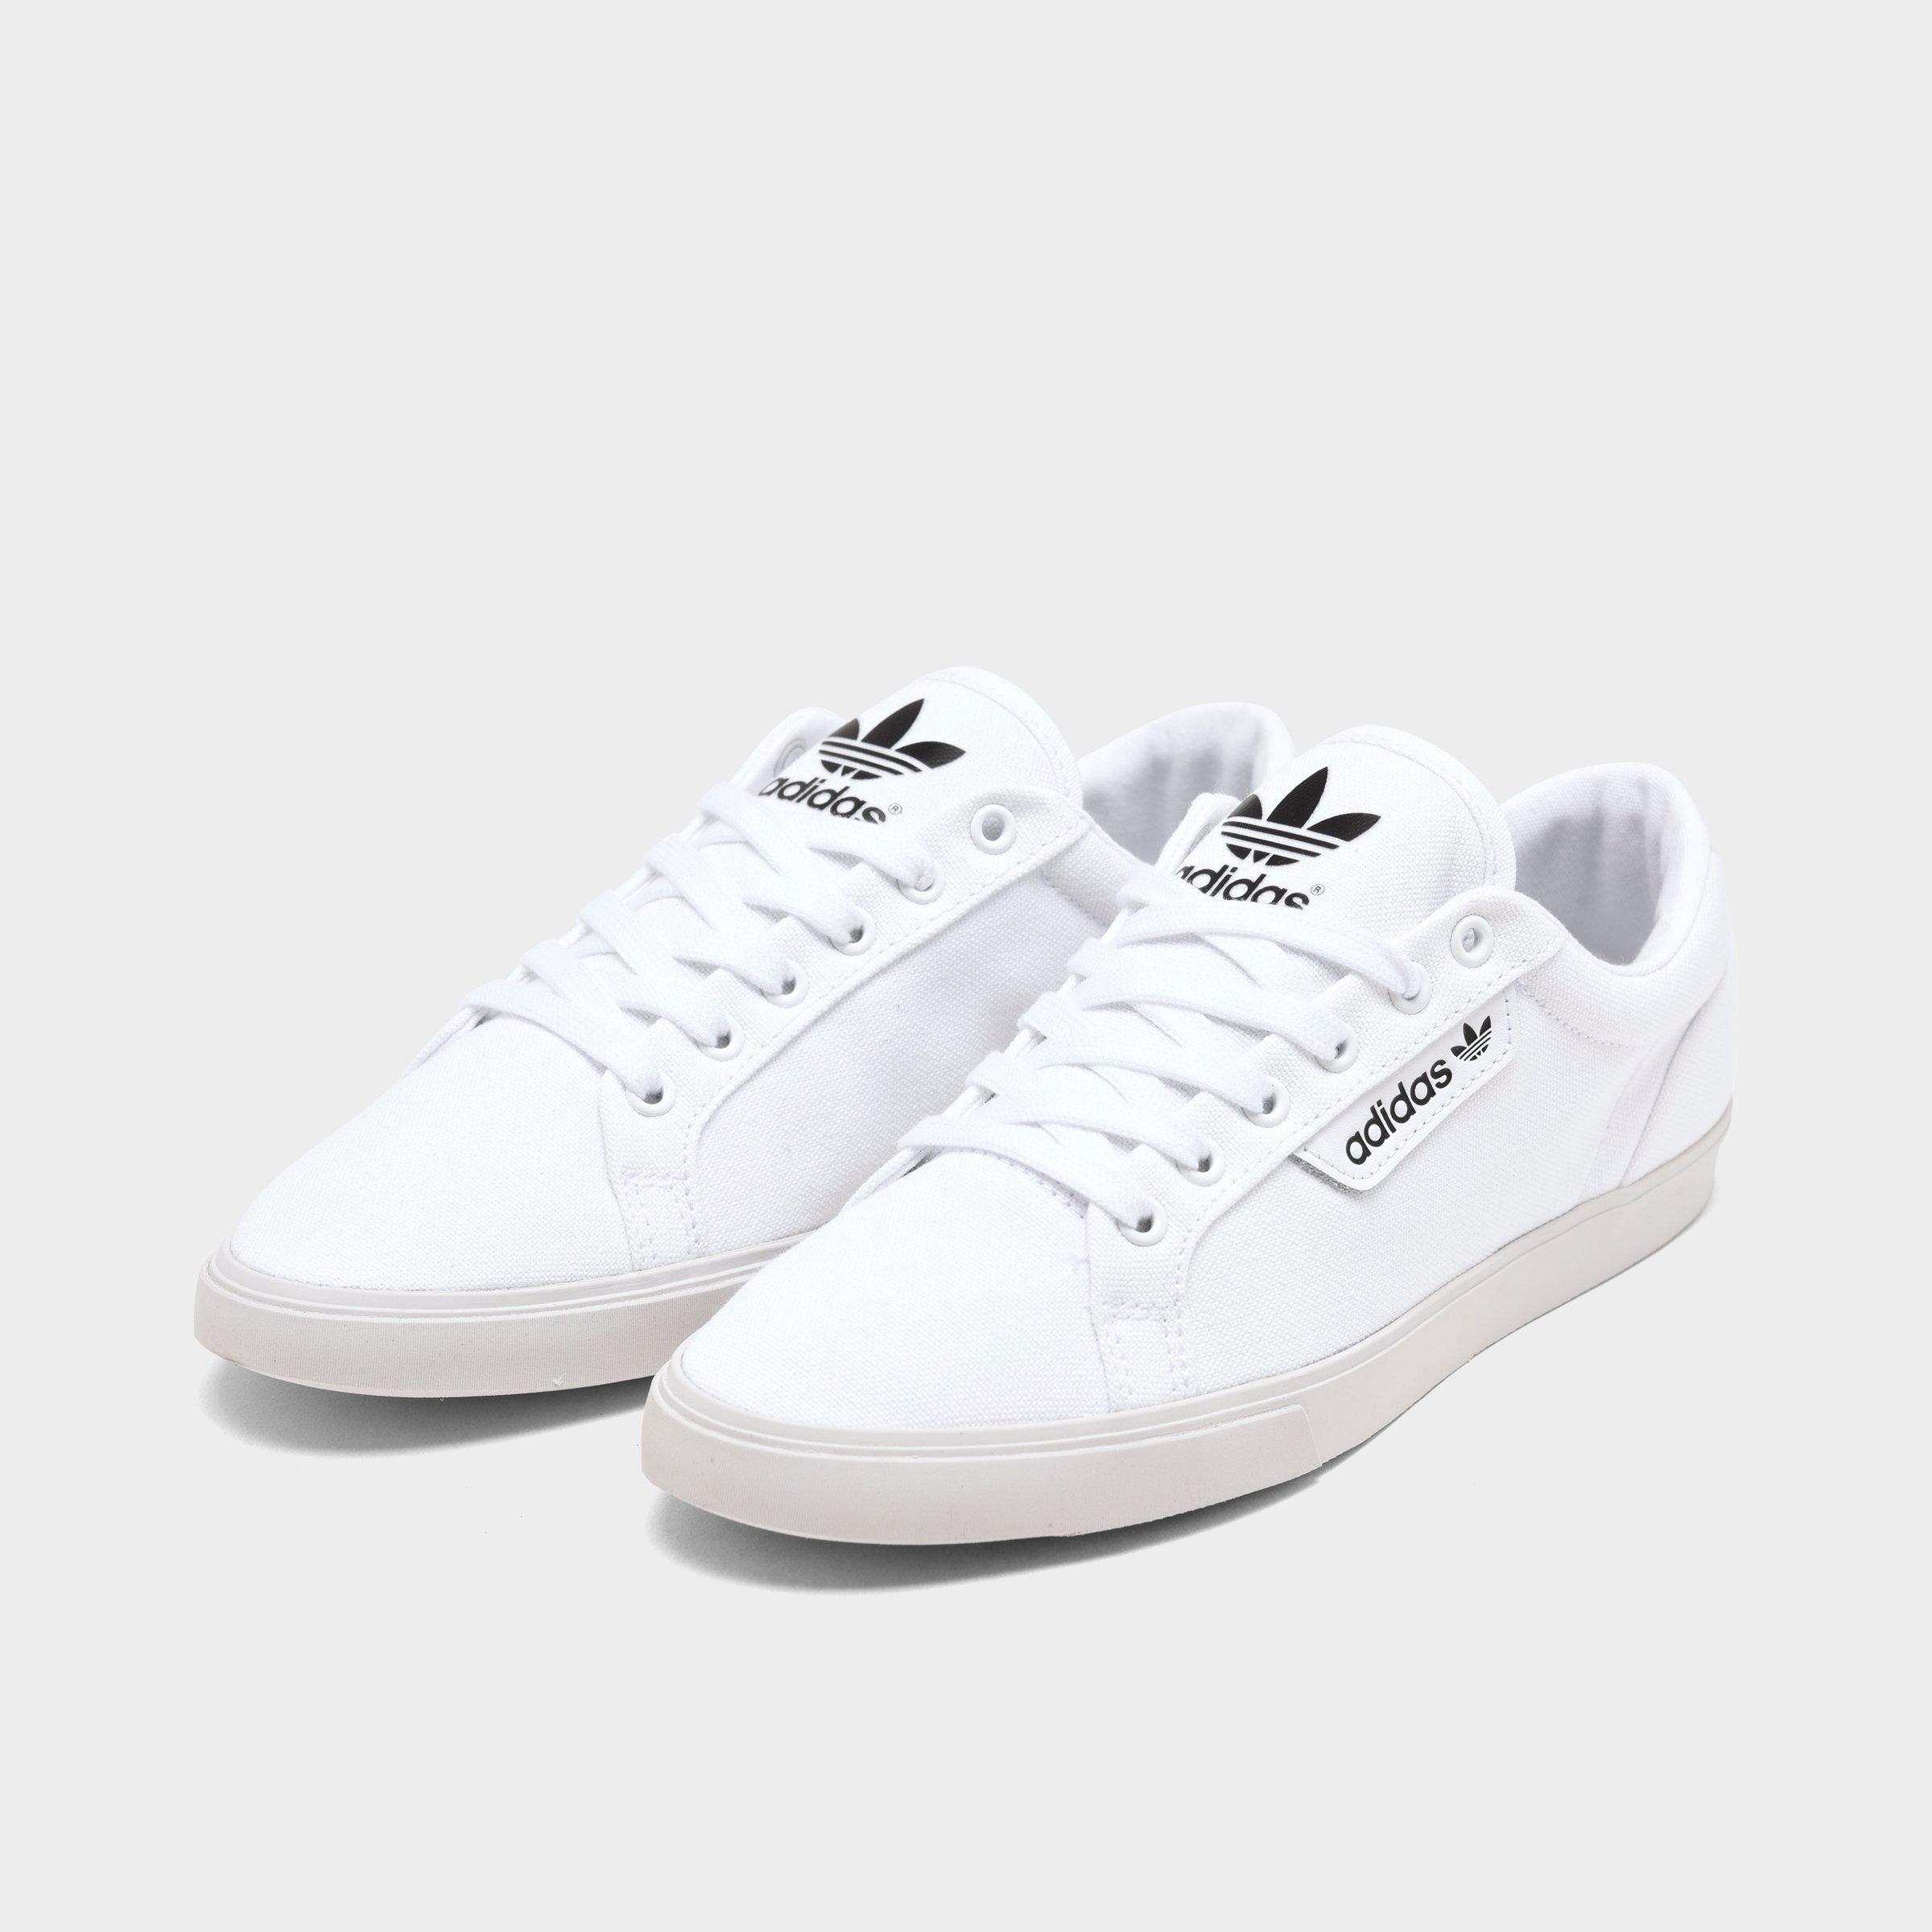 adidas casual canvas shoes